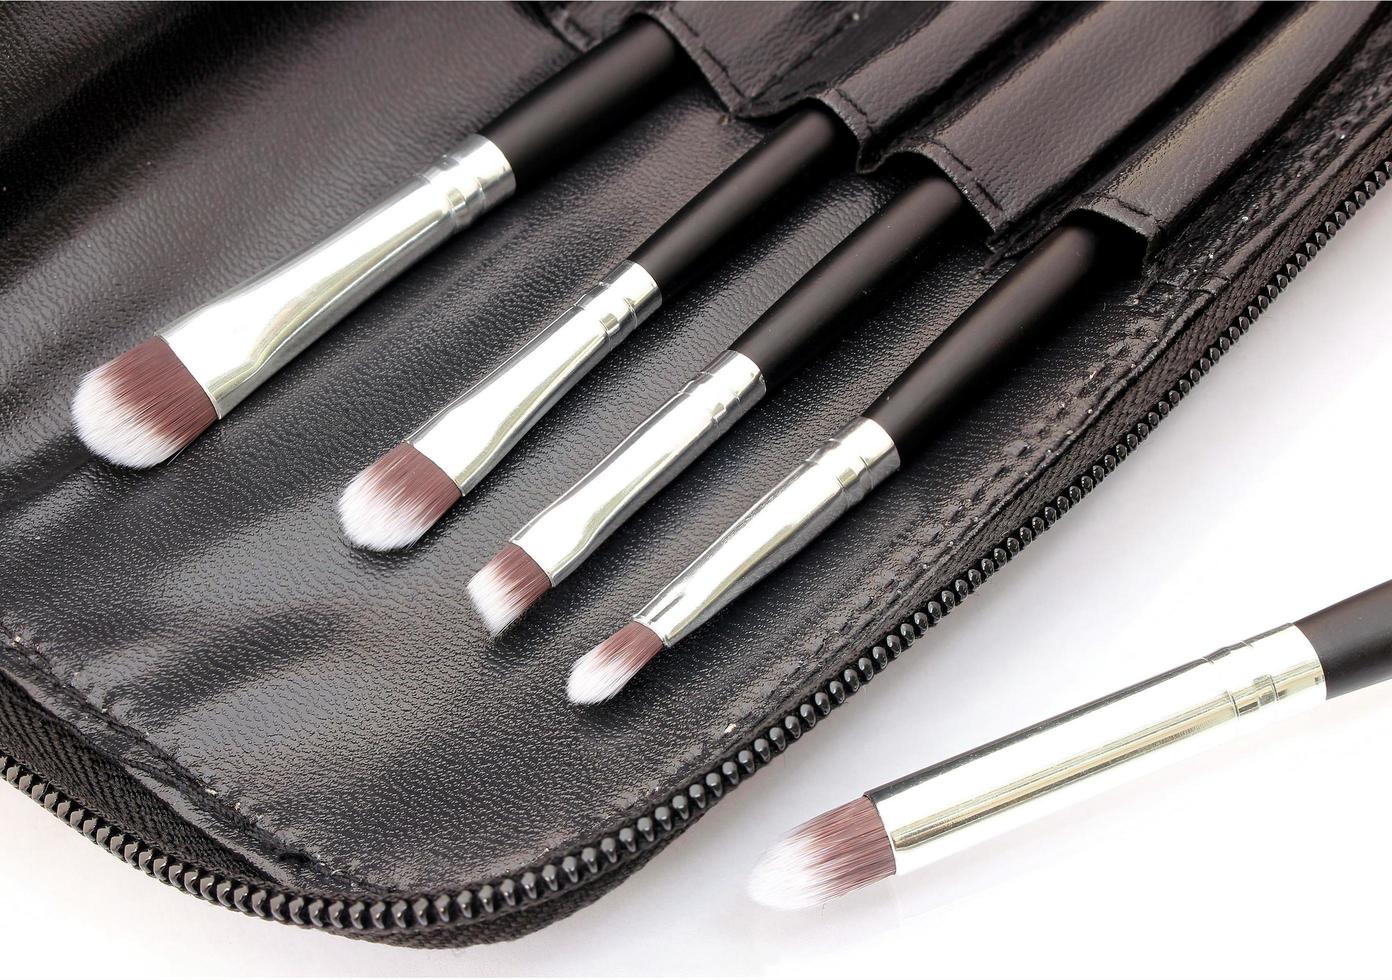 Makeup brushes in a bag photo